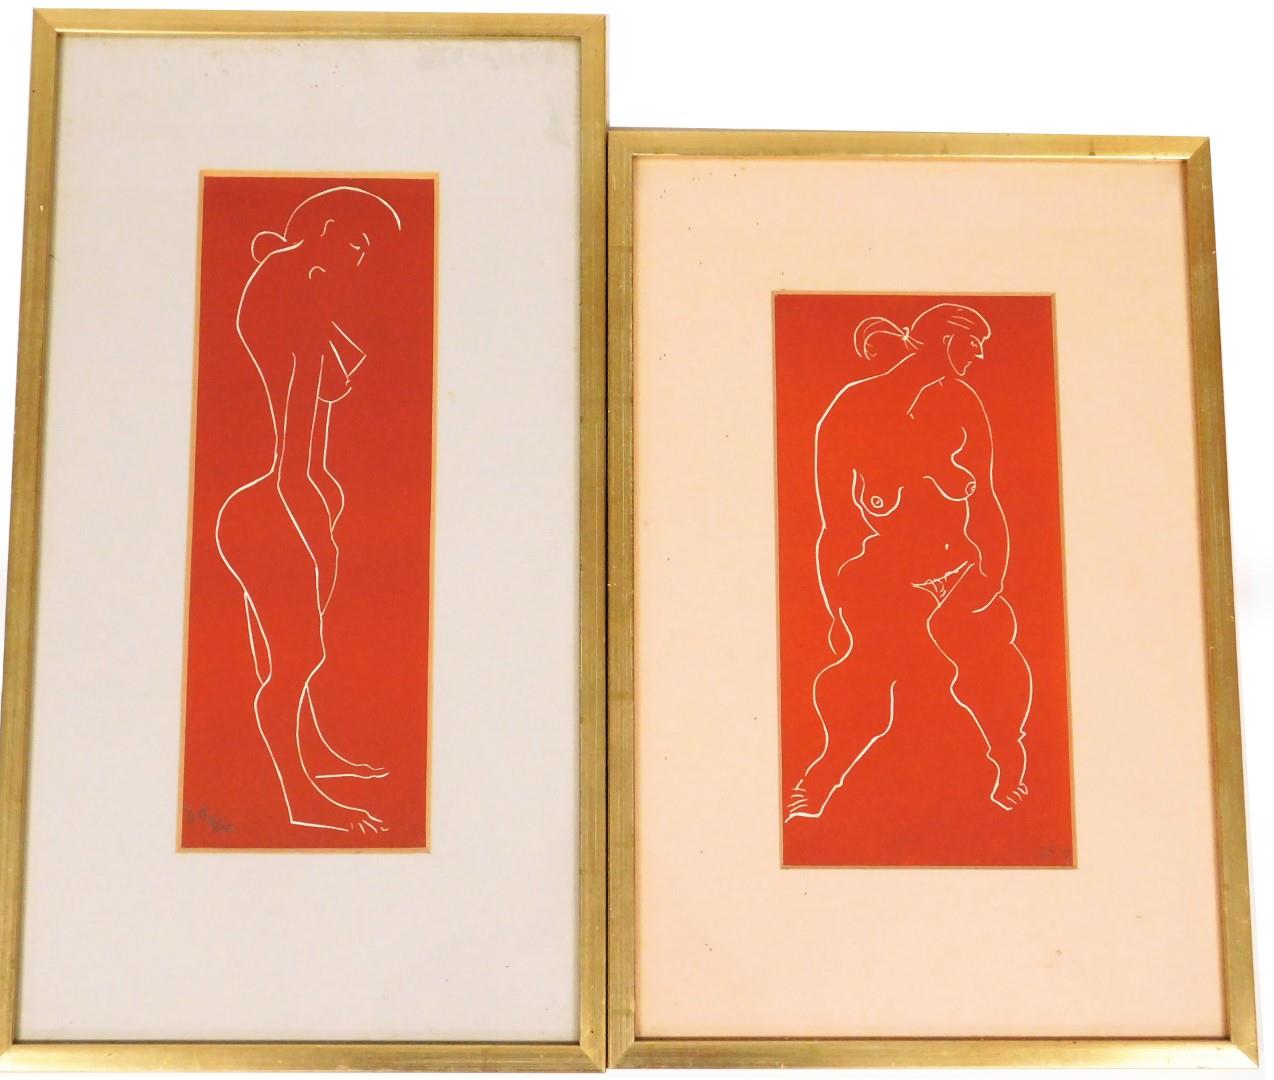 D B (21stC). Ladies in nude, limited edition, etchings, one marked 4/2, the other 8/20, in pencil,